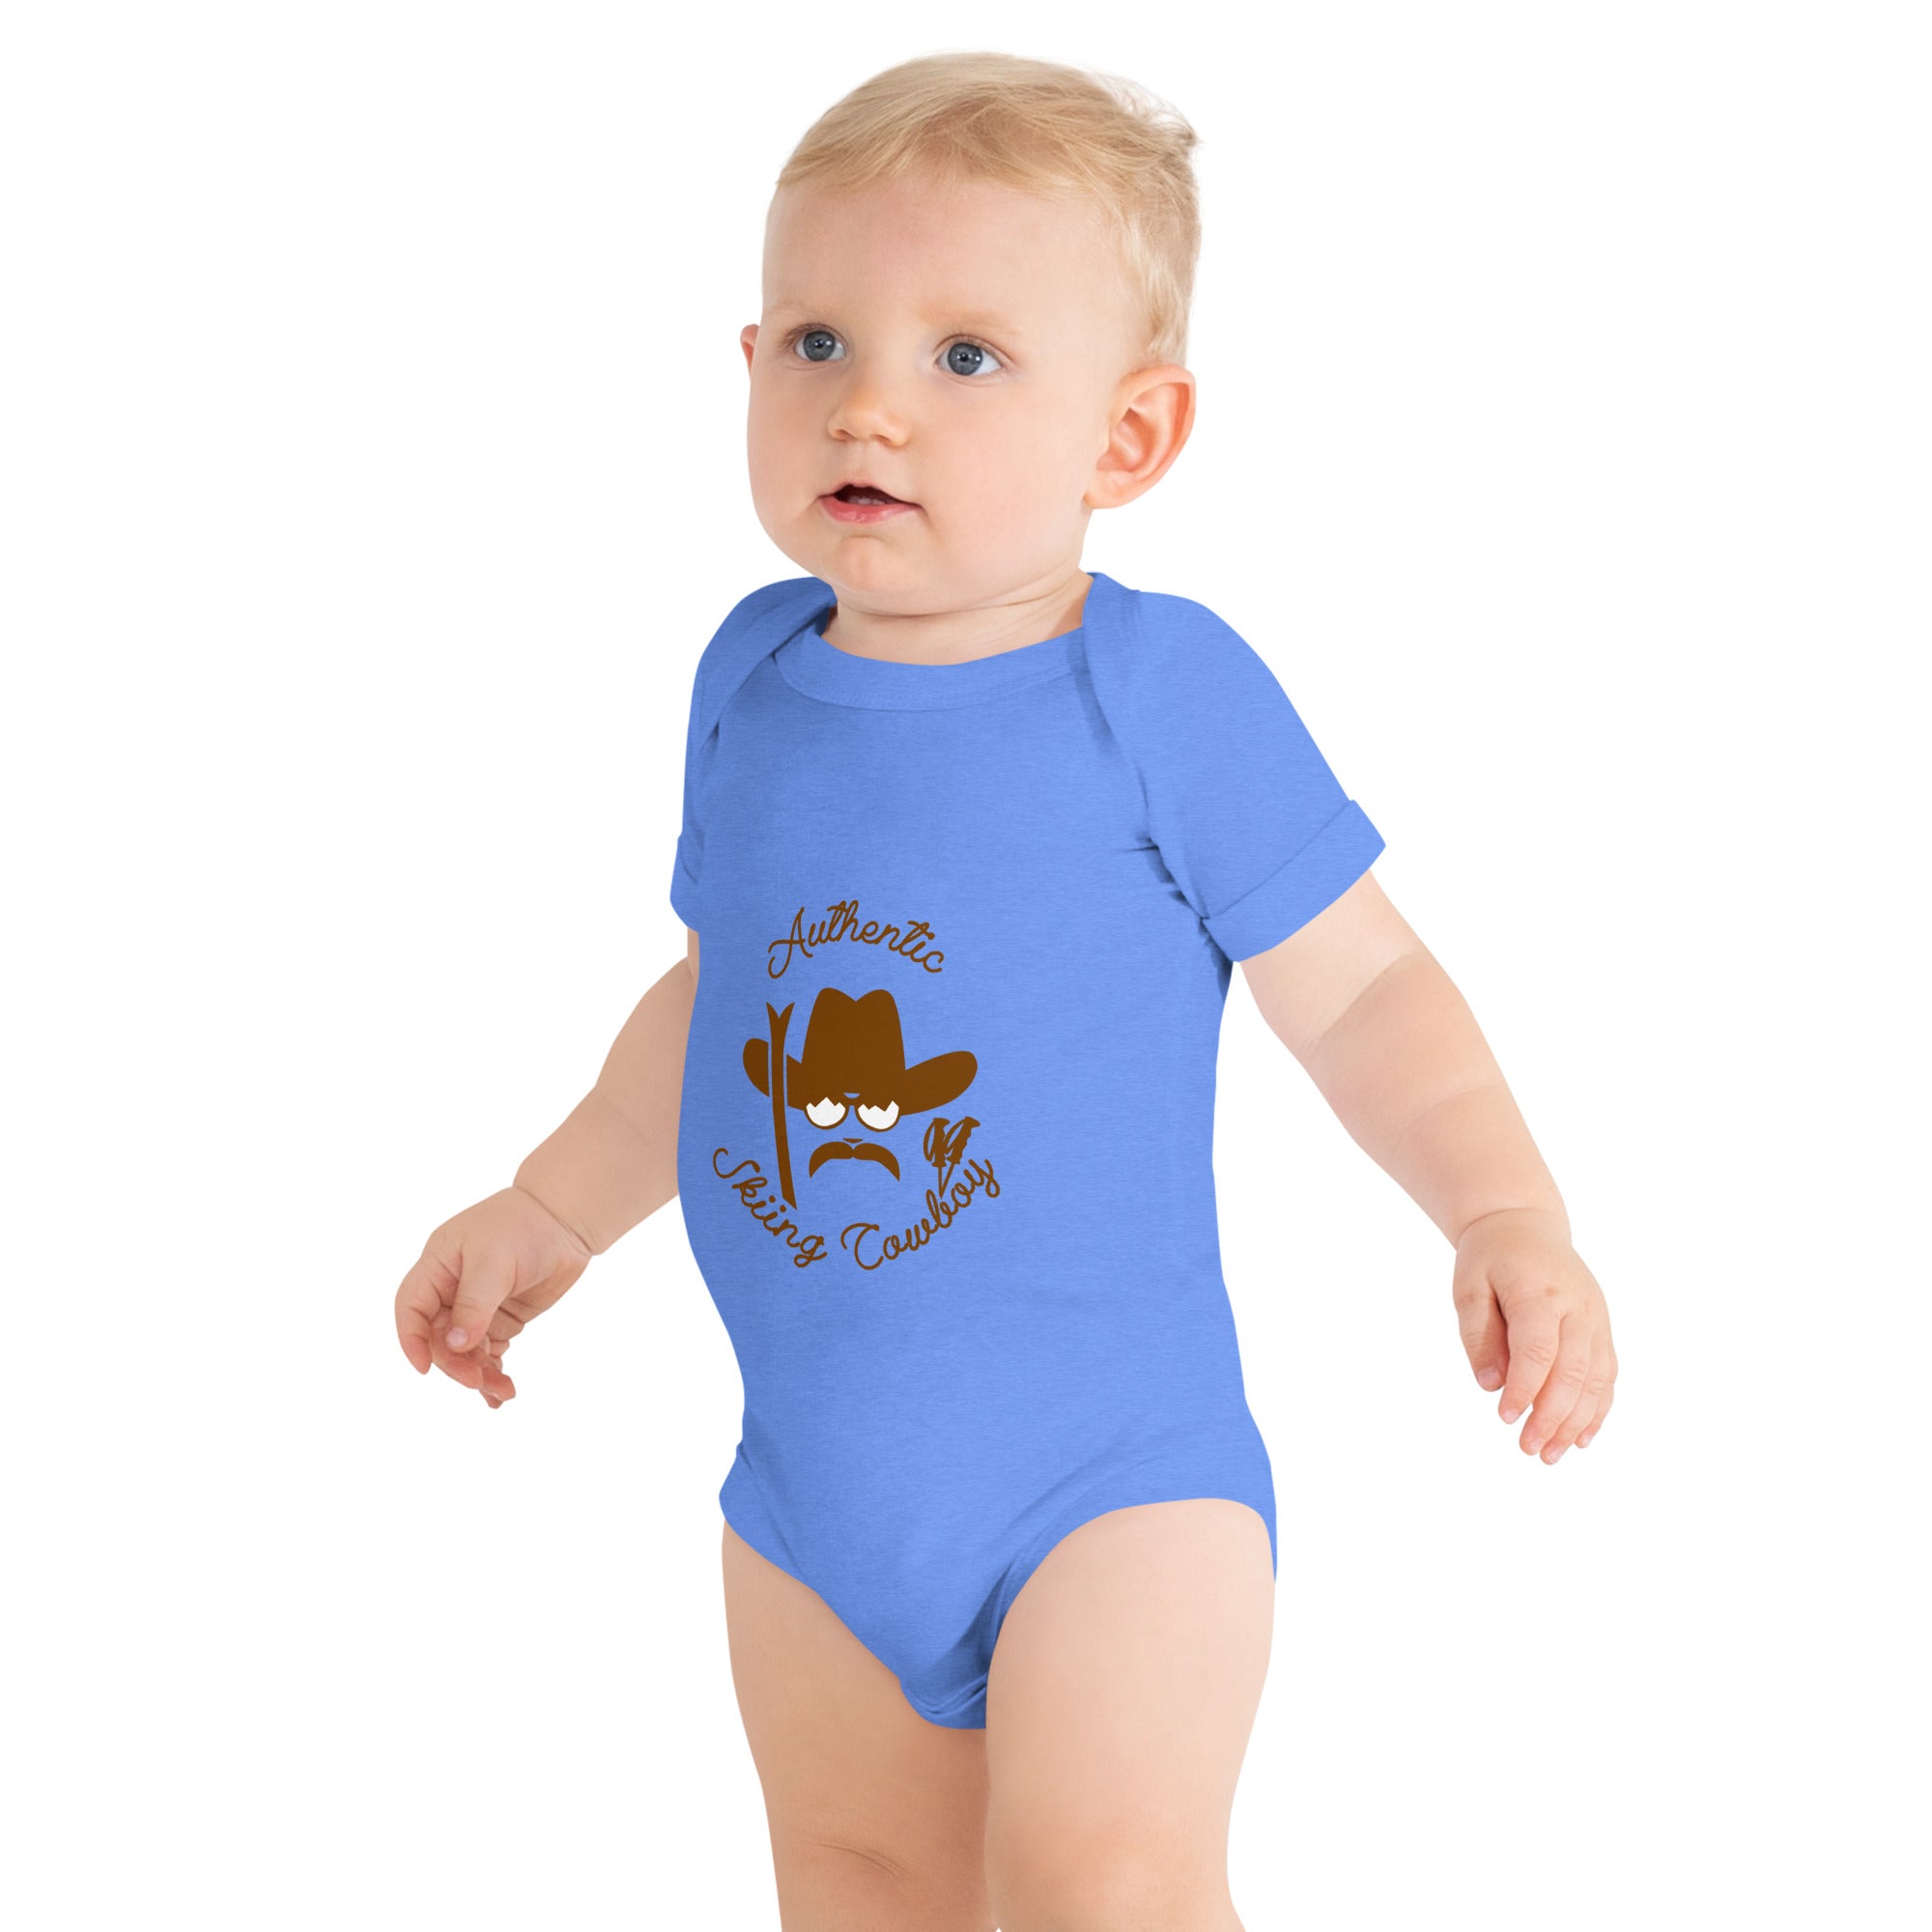 Baby short sleeve one piece Authentic Skiing Cowboy